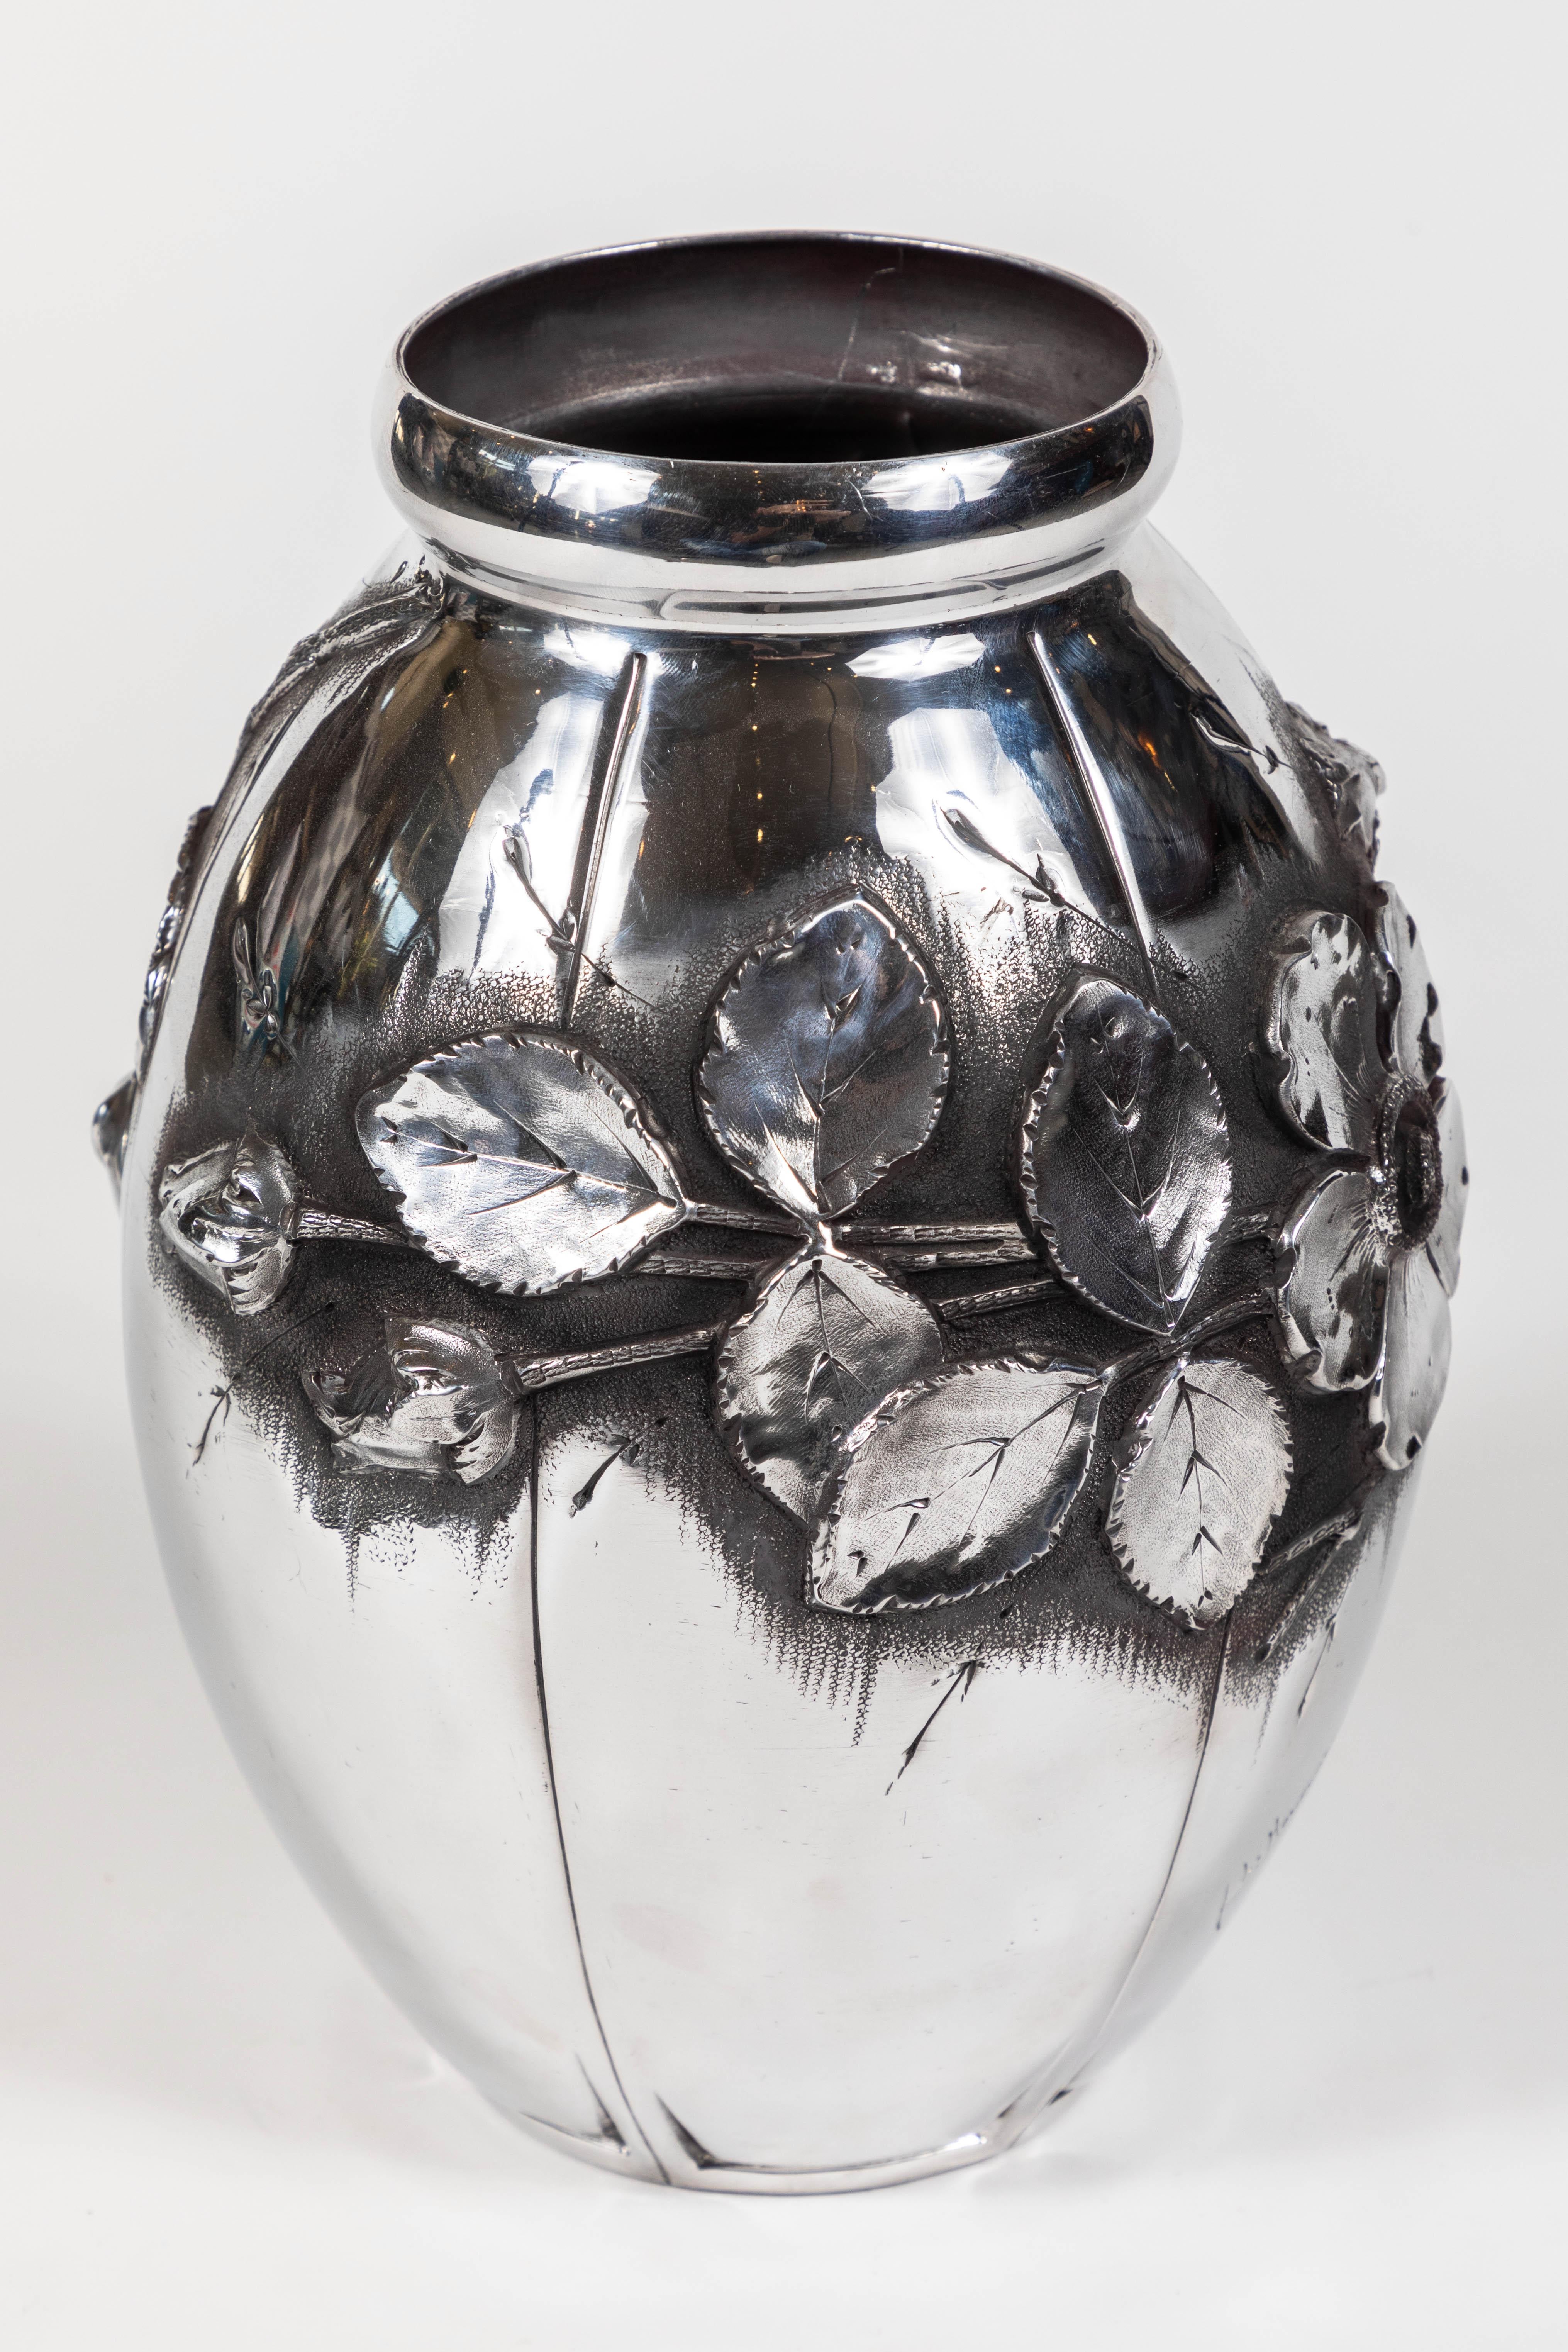 French Art Nouveau aluminum vase by L. Houzeaux, newly polished.

Signed by the Artist and stamped:

Metal D'Art
Cisele'
Main.
 
Du Chevalier.